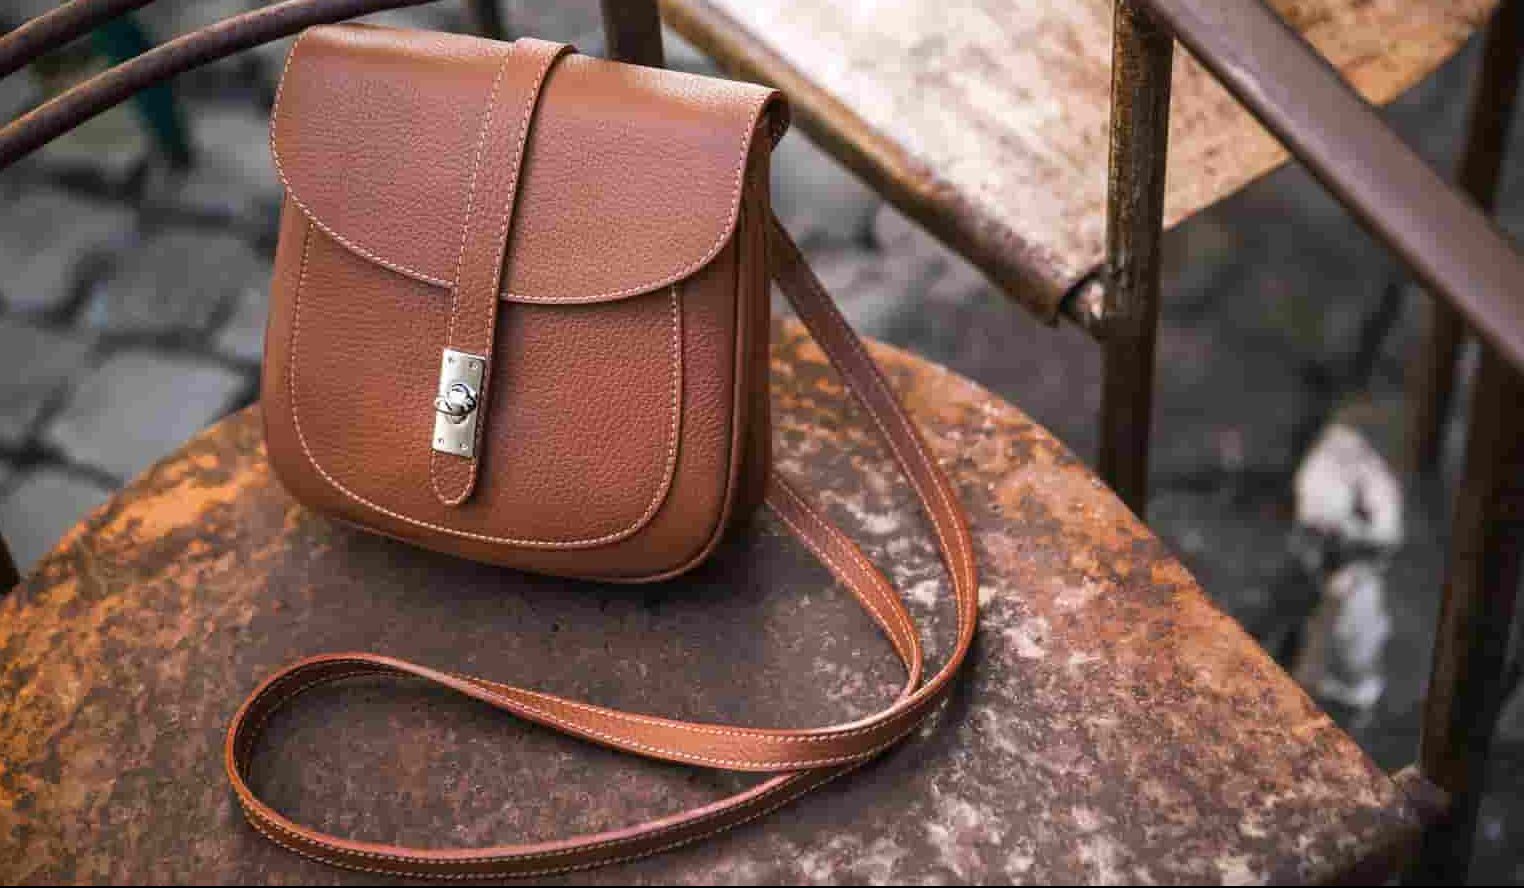 Introducing pouch leather bag + the best purchase price